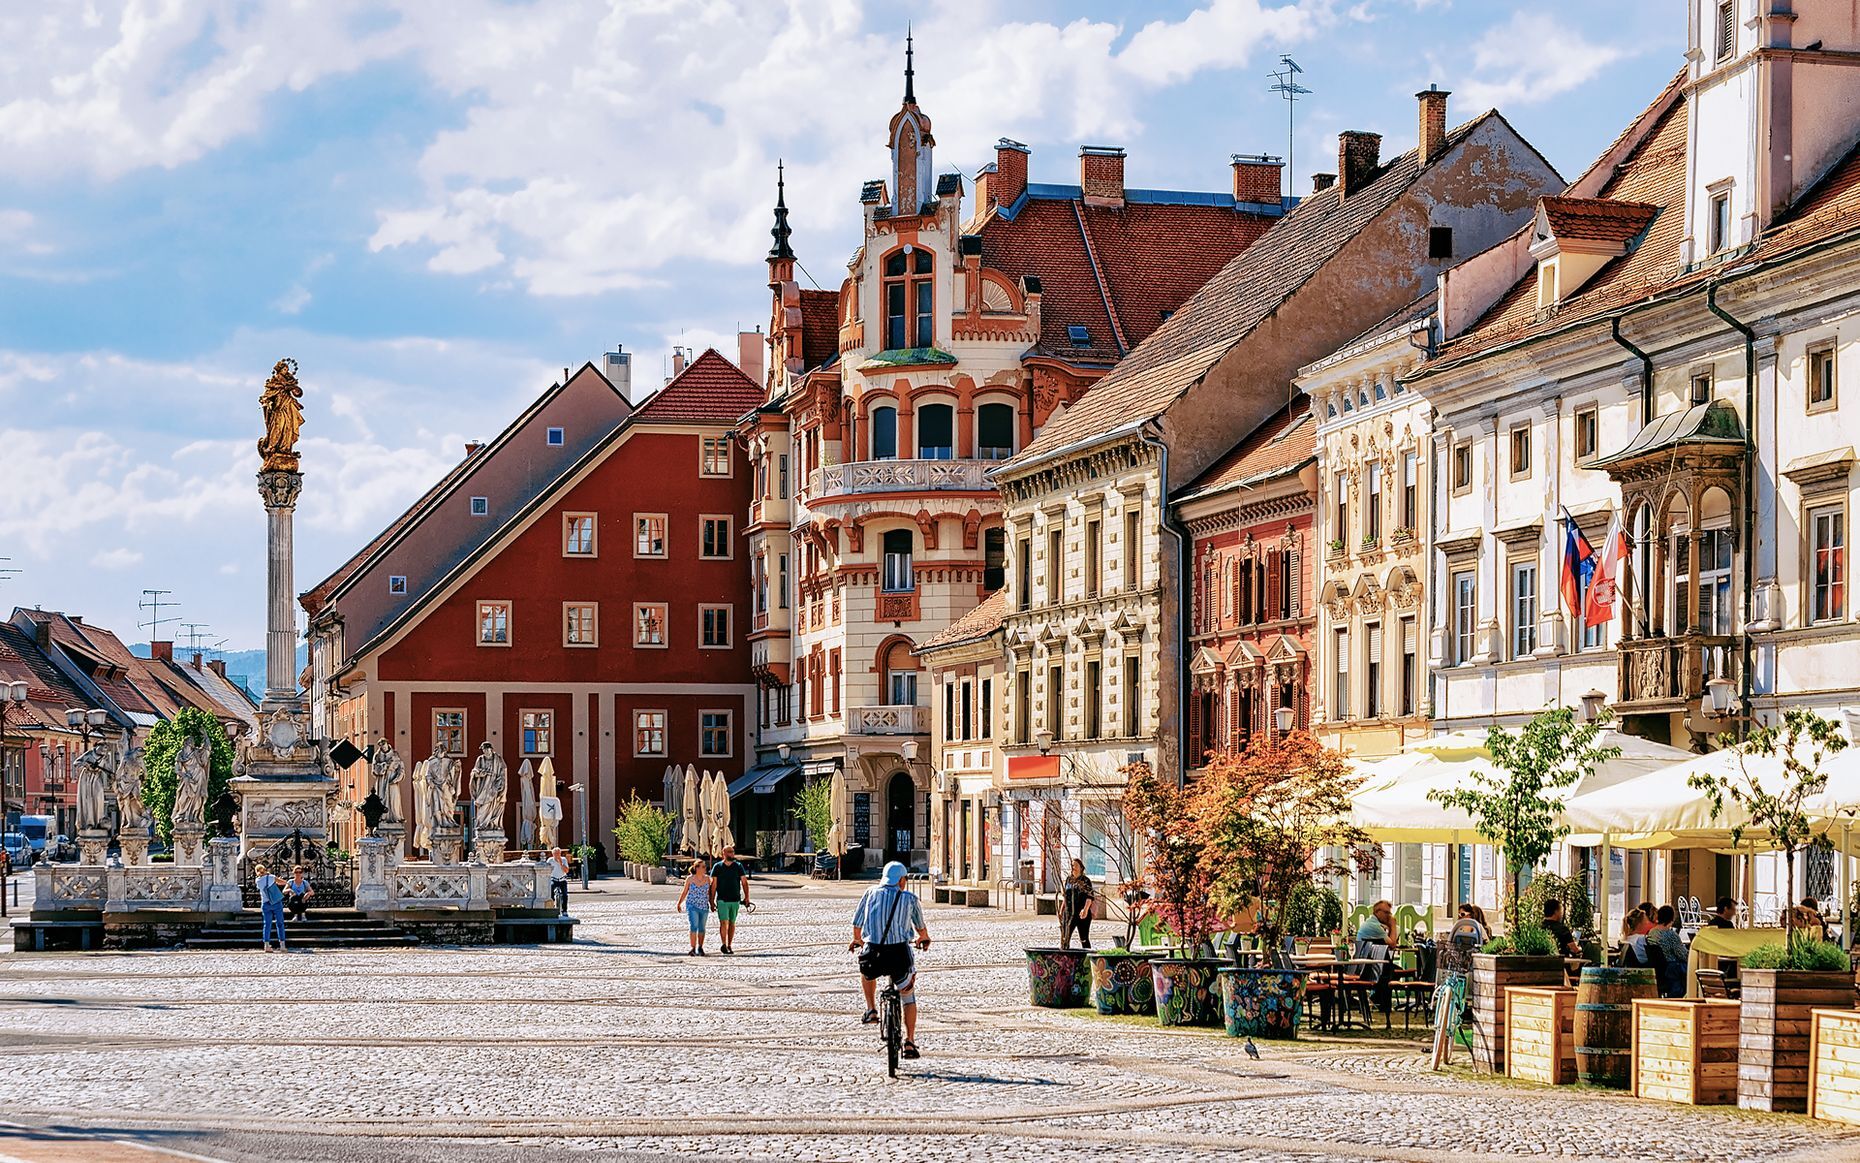 <p>Slovenia’s second-largest city, <a href="https://www.slovenia.info/en/places-to-go/regions/alpine-slovenia/maribor-pohorje">Maribor</a>, is located in the wine-growing region of Styria, the perfect place for foodies in search of new flavours. Its medieval town centre is lined with cafés and historic buildings that are sure to charm cultural aficionados. Visitors can also see the world’s oldest grape vine, climb the cathedral tower and visit Maribor Castle, which houses a fascinating museum. Plan a getaway during the grape harvest if your schedule allows, so that you can take part in their wine festivals and discover some wonderful new wines.</p>